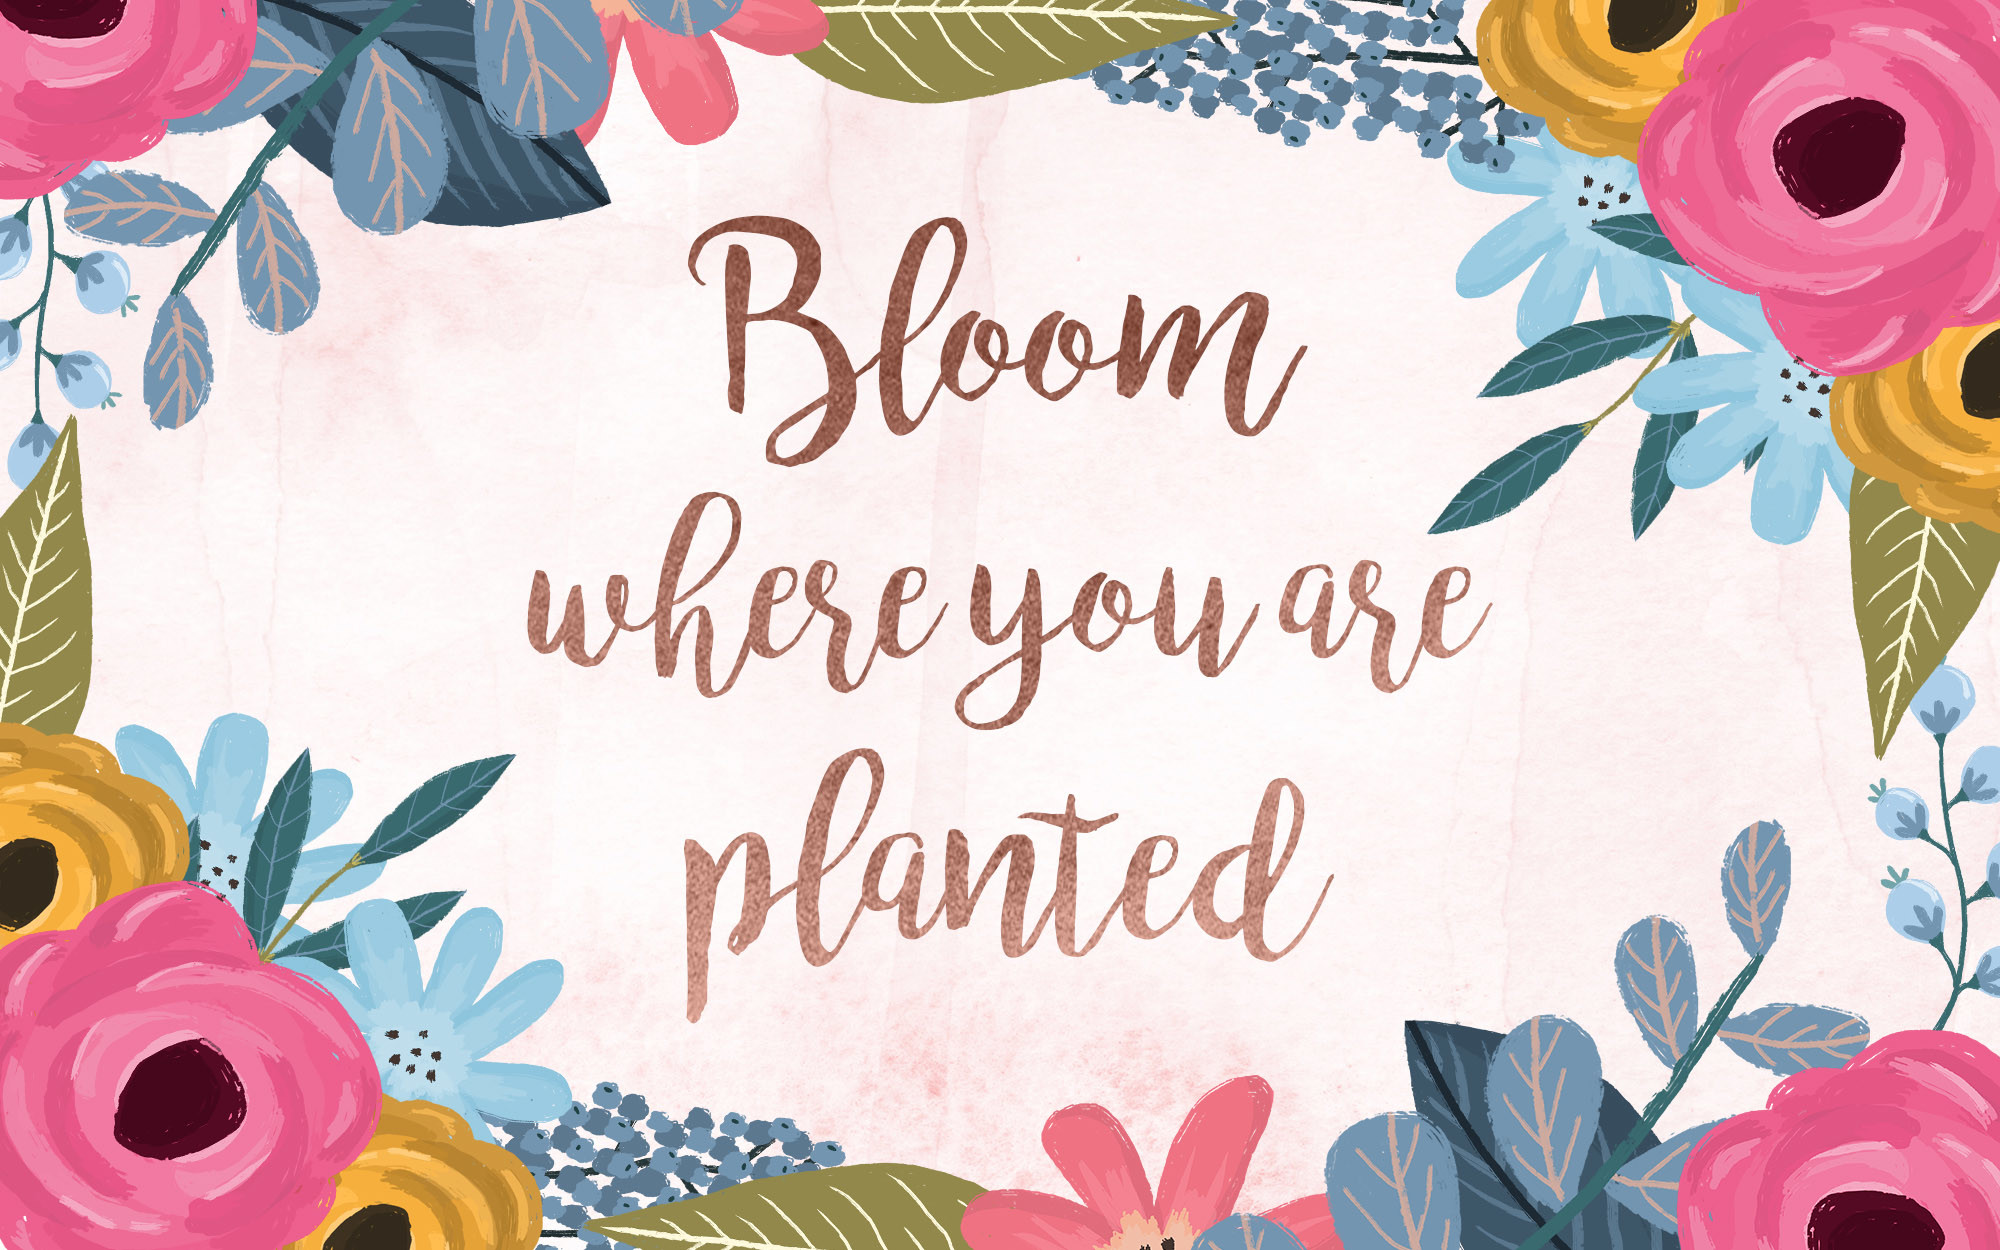 2000x1250 Bloom Where You Are Planted desktop wallpaper